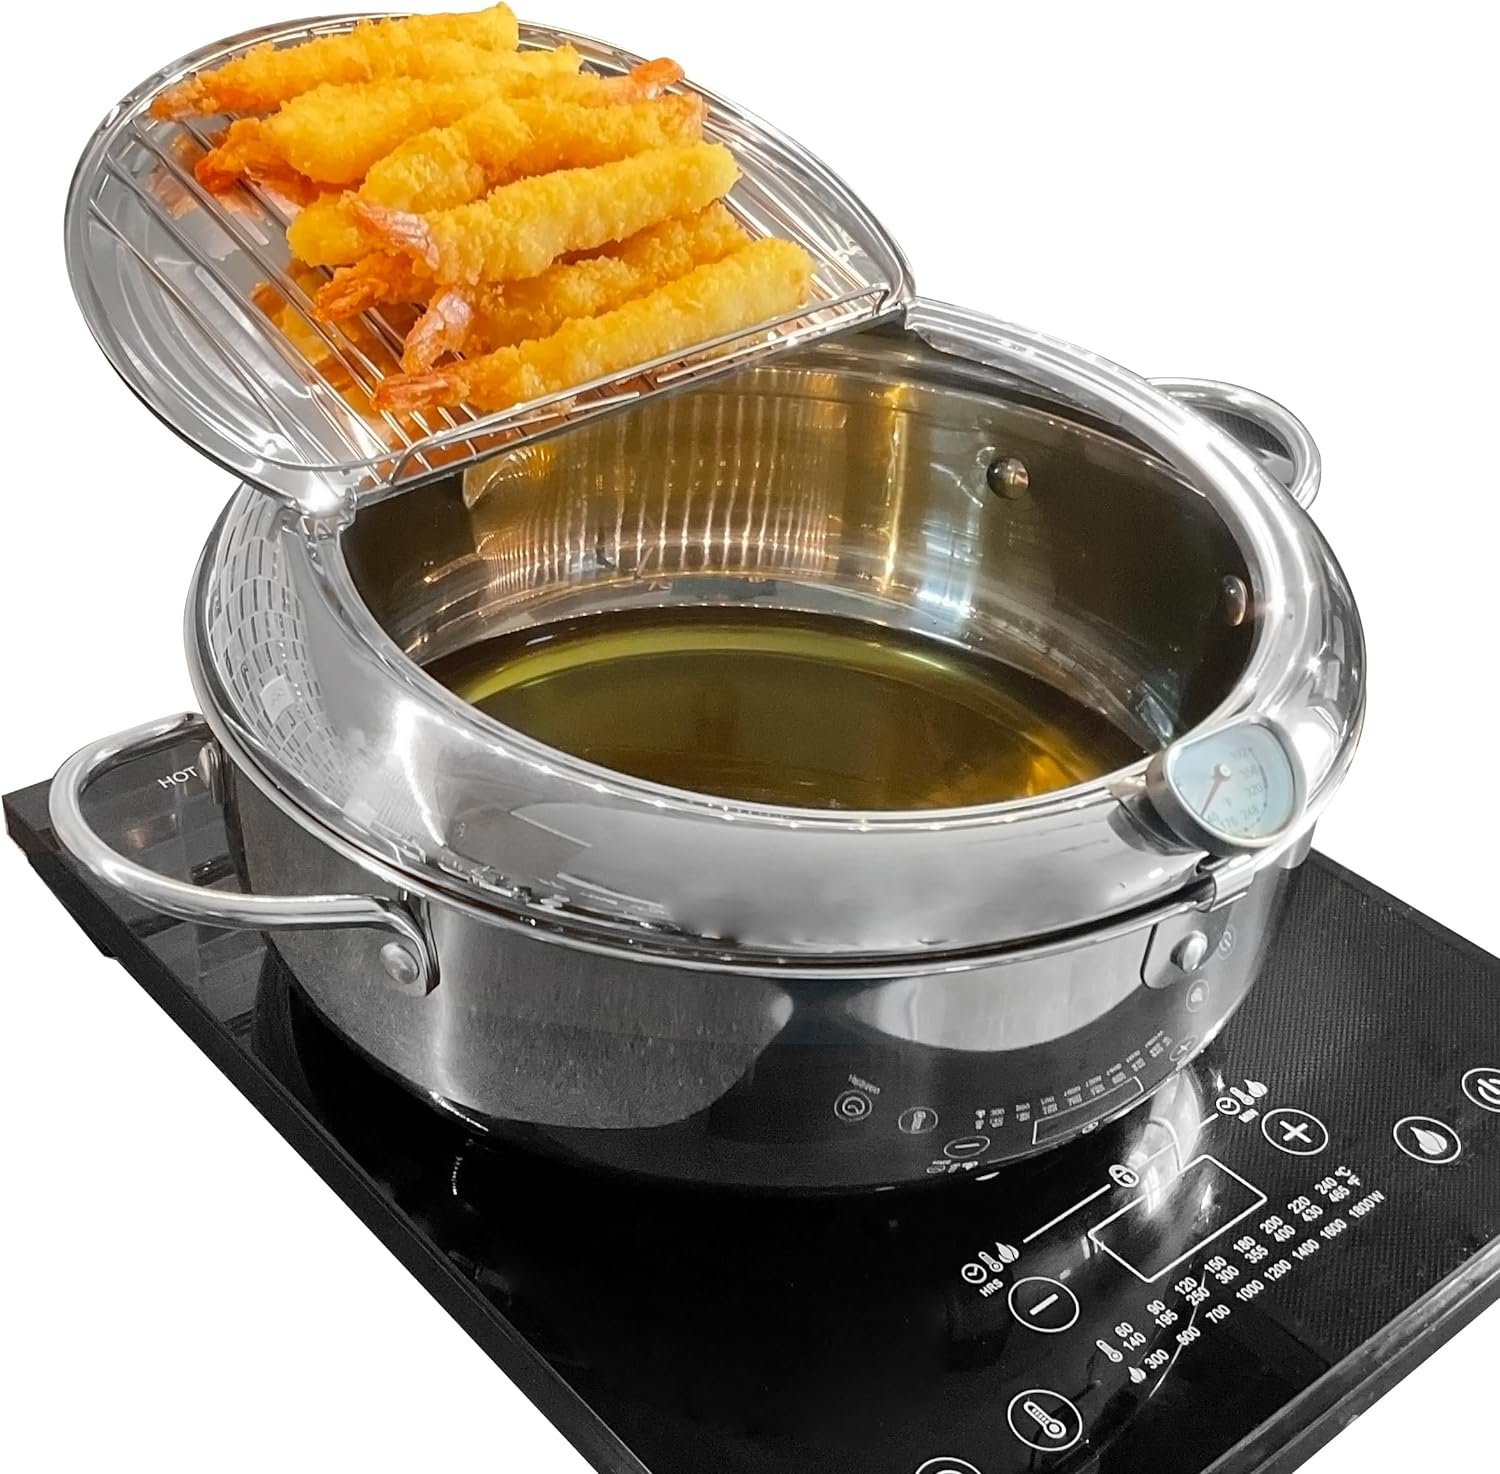 Saltlas Deep Fryer Pot (°F), 11/4.4Qt (4.2 L) Extra Large Tempura Frying Pot with Lid, 304 Stainless Steel Fry Pot with Fahrenheit Temperature Control and Oil Drip Drain Rack: Home  Kitchen